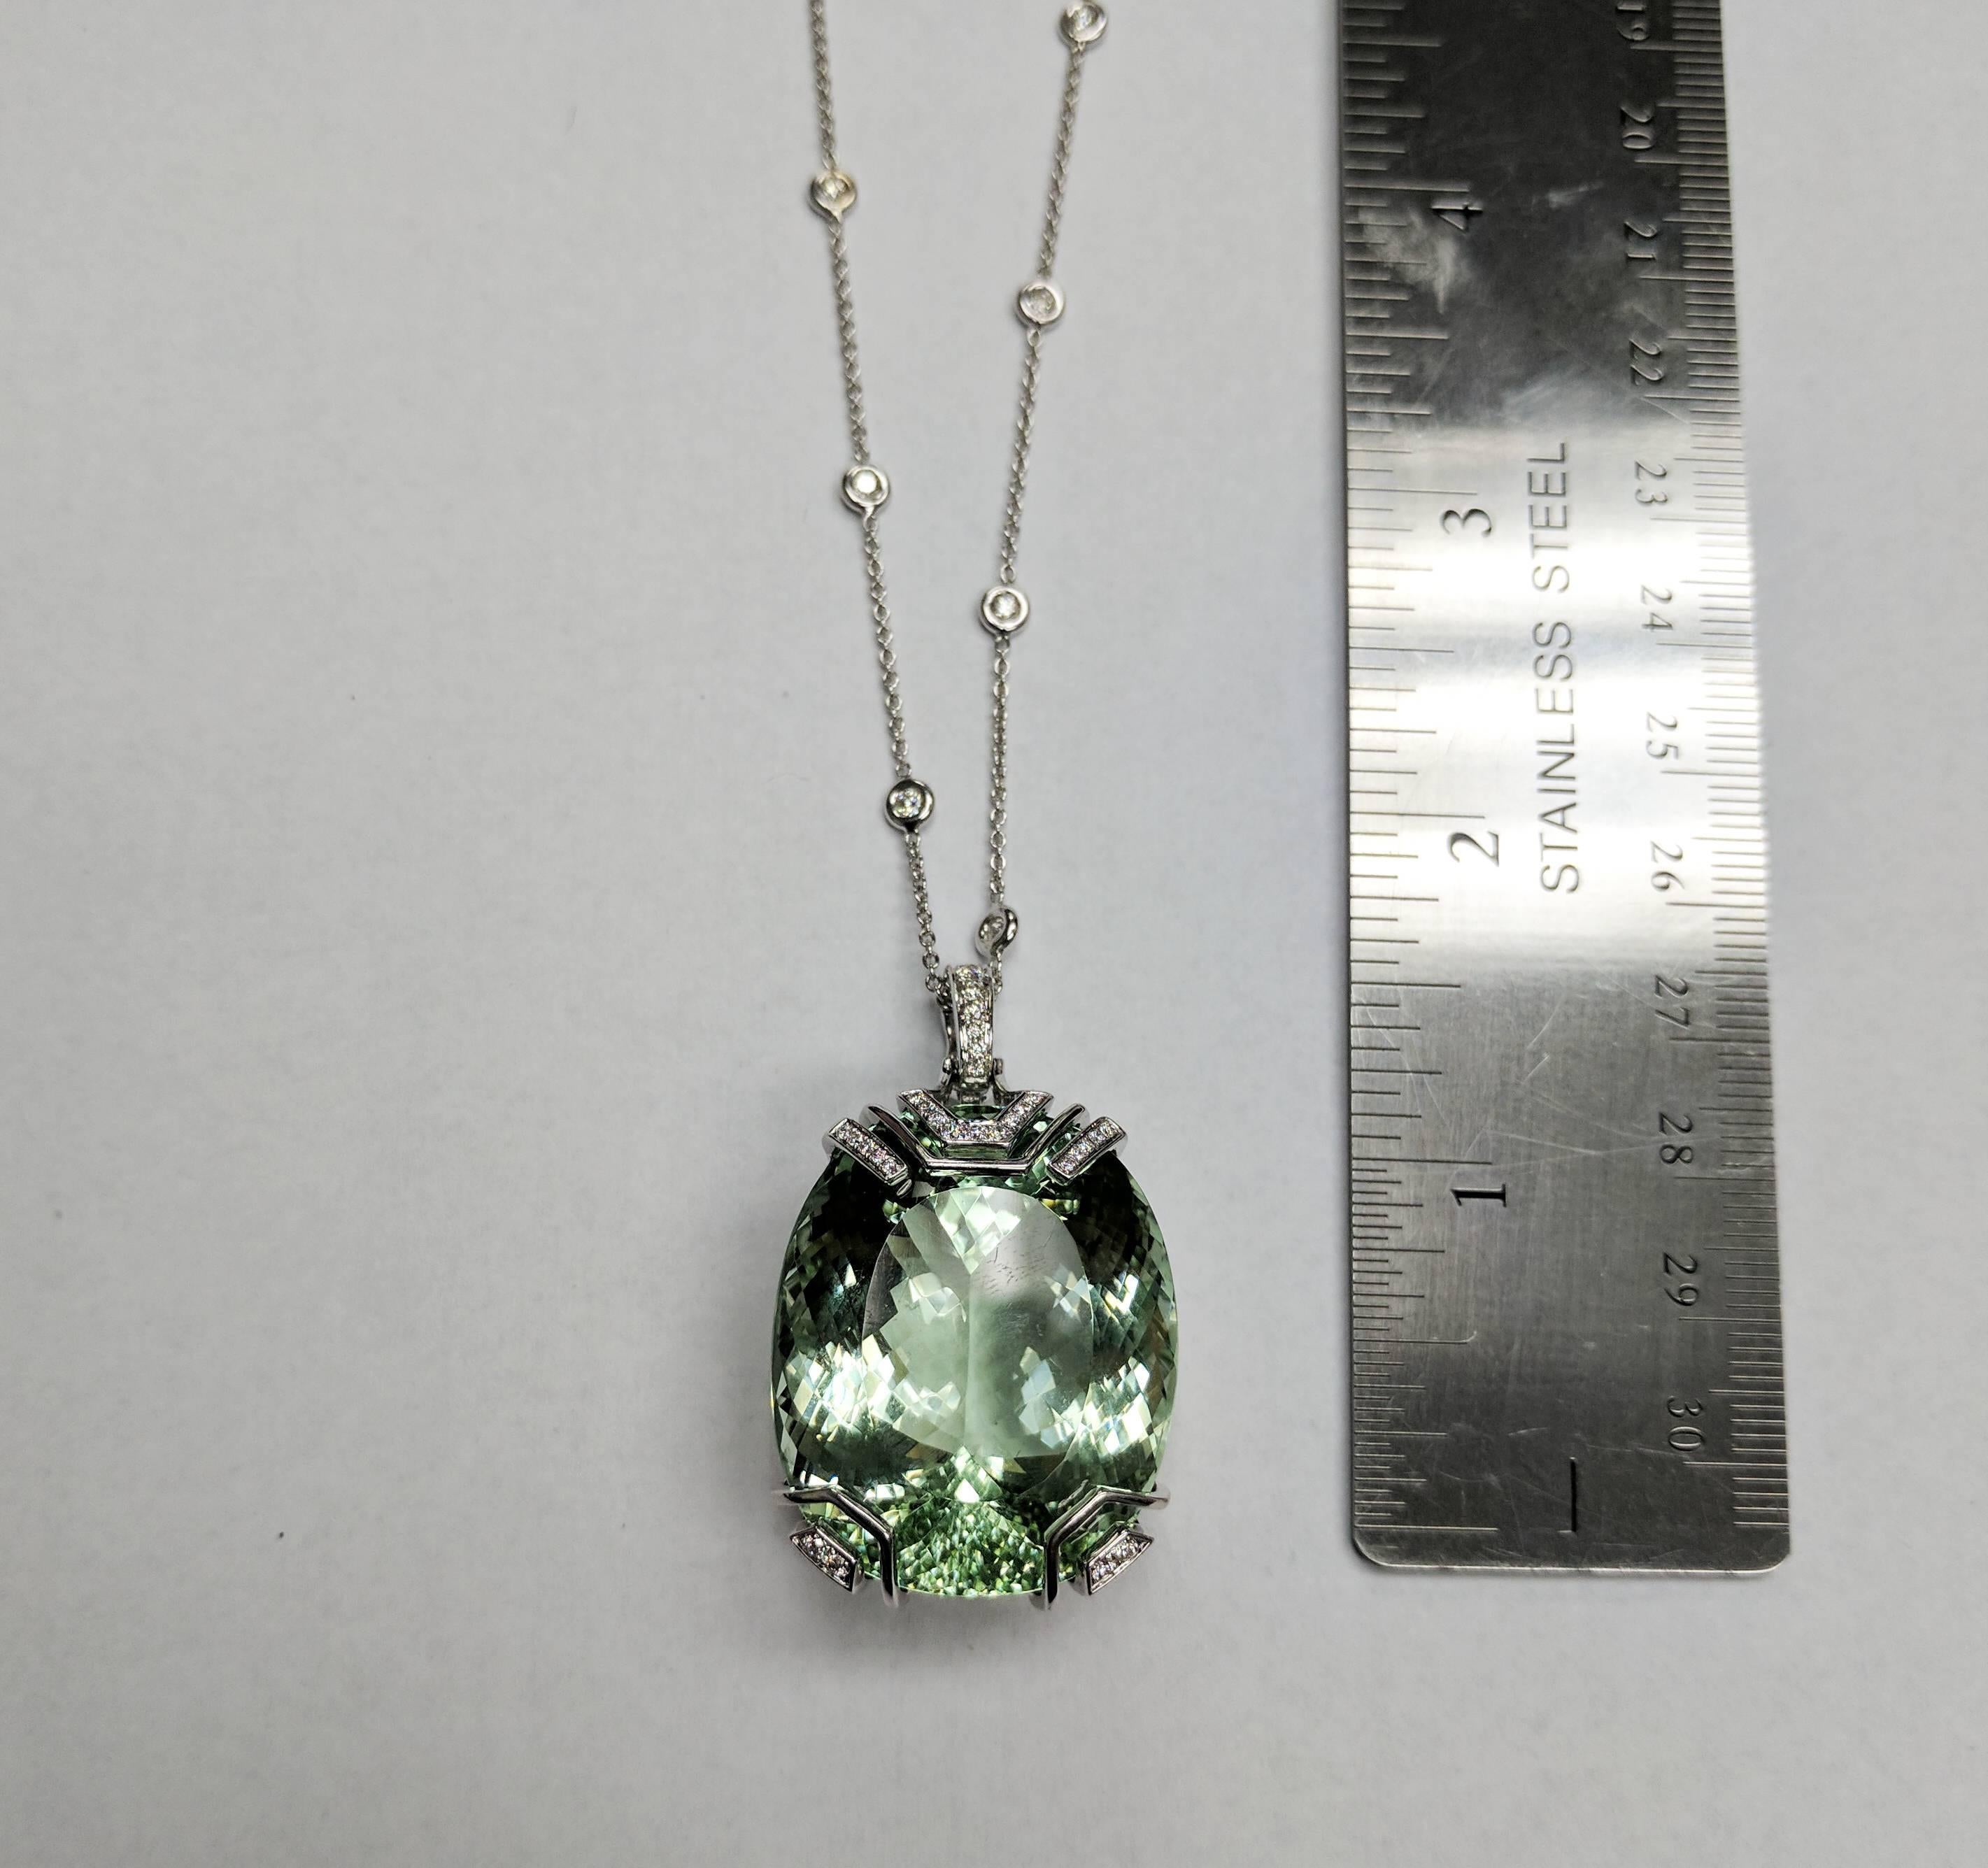 Frederic Sage 76.83 Carat Green Beryl Diamond Pendant Necklace Diamond Chain In New Condition For Sale In New York, NY